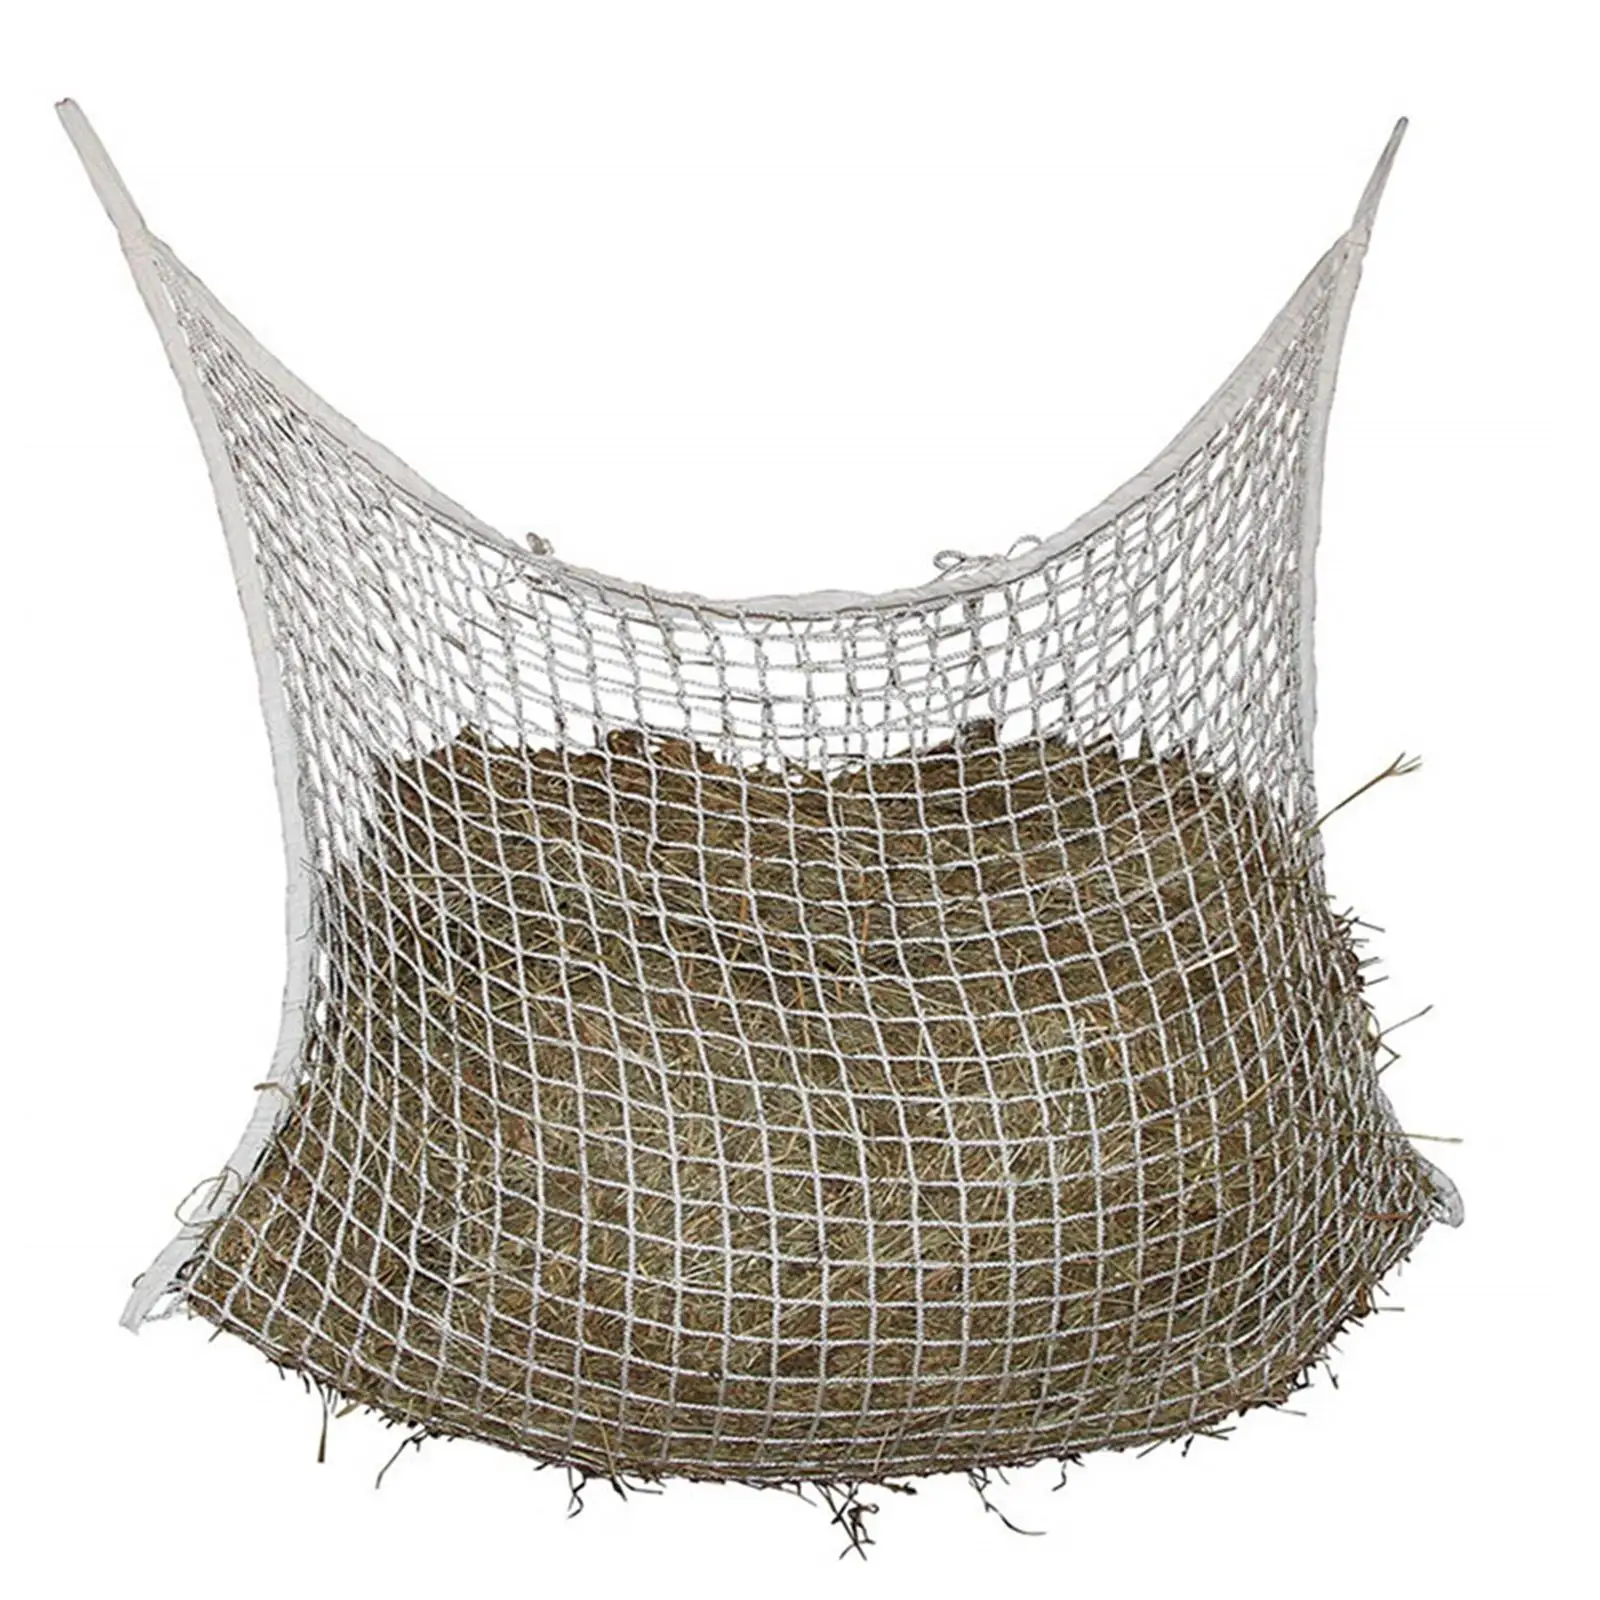 Full Day Horse Hay Net Bag Big Feeding Woven Straw Bag with Small Holes